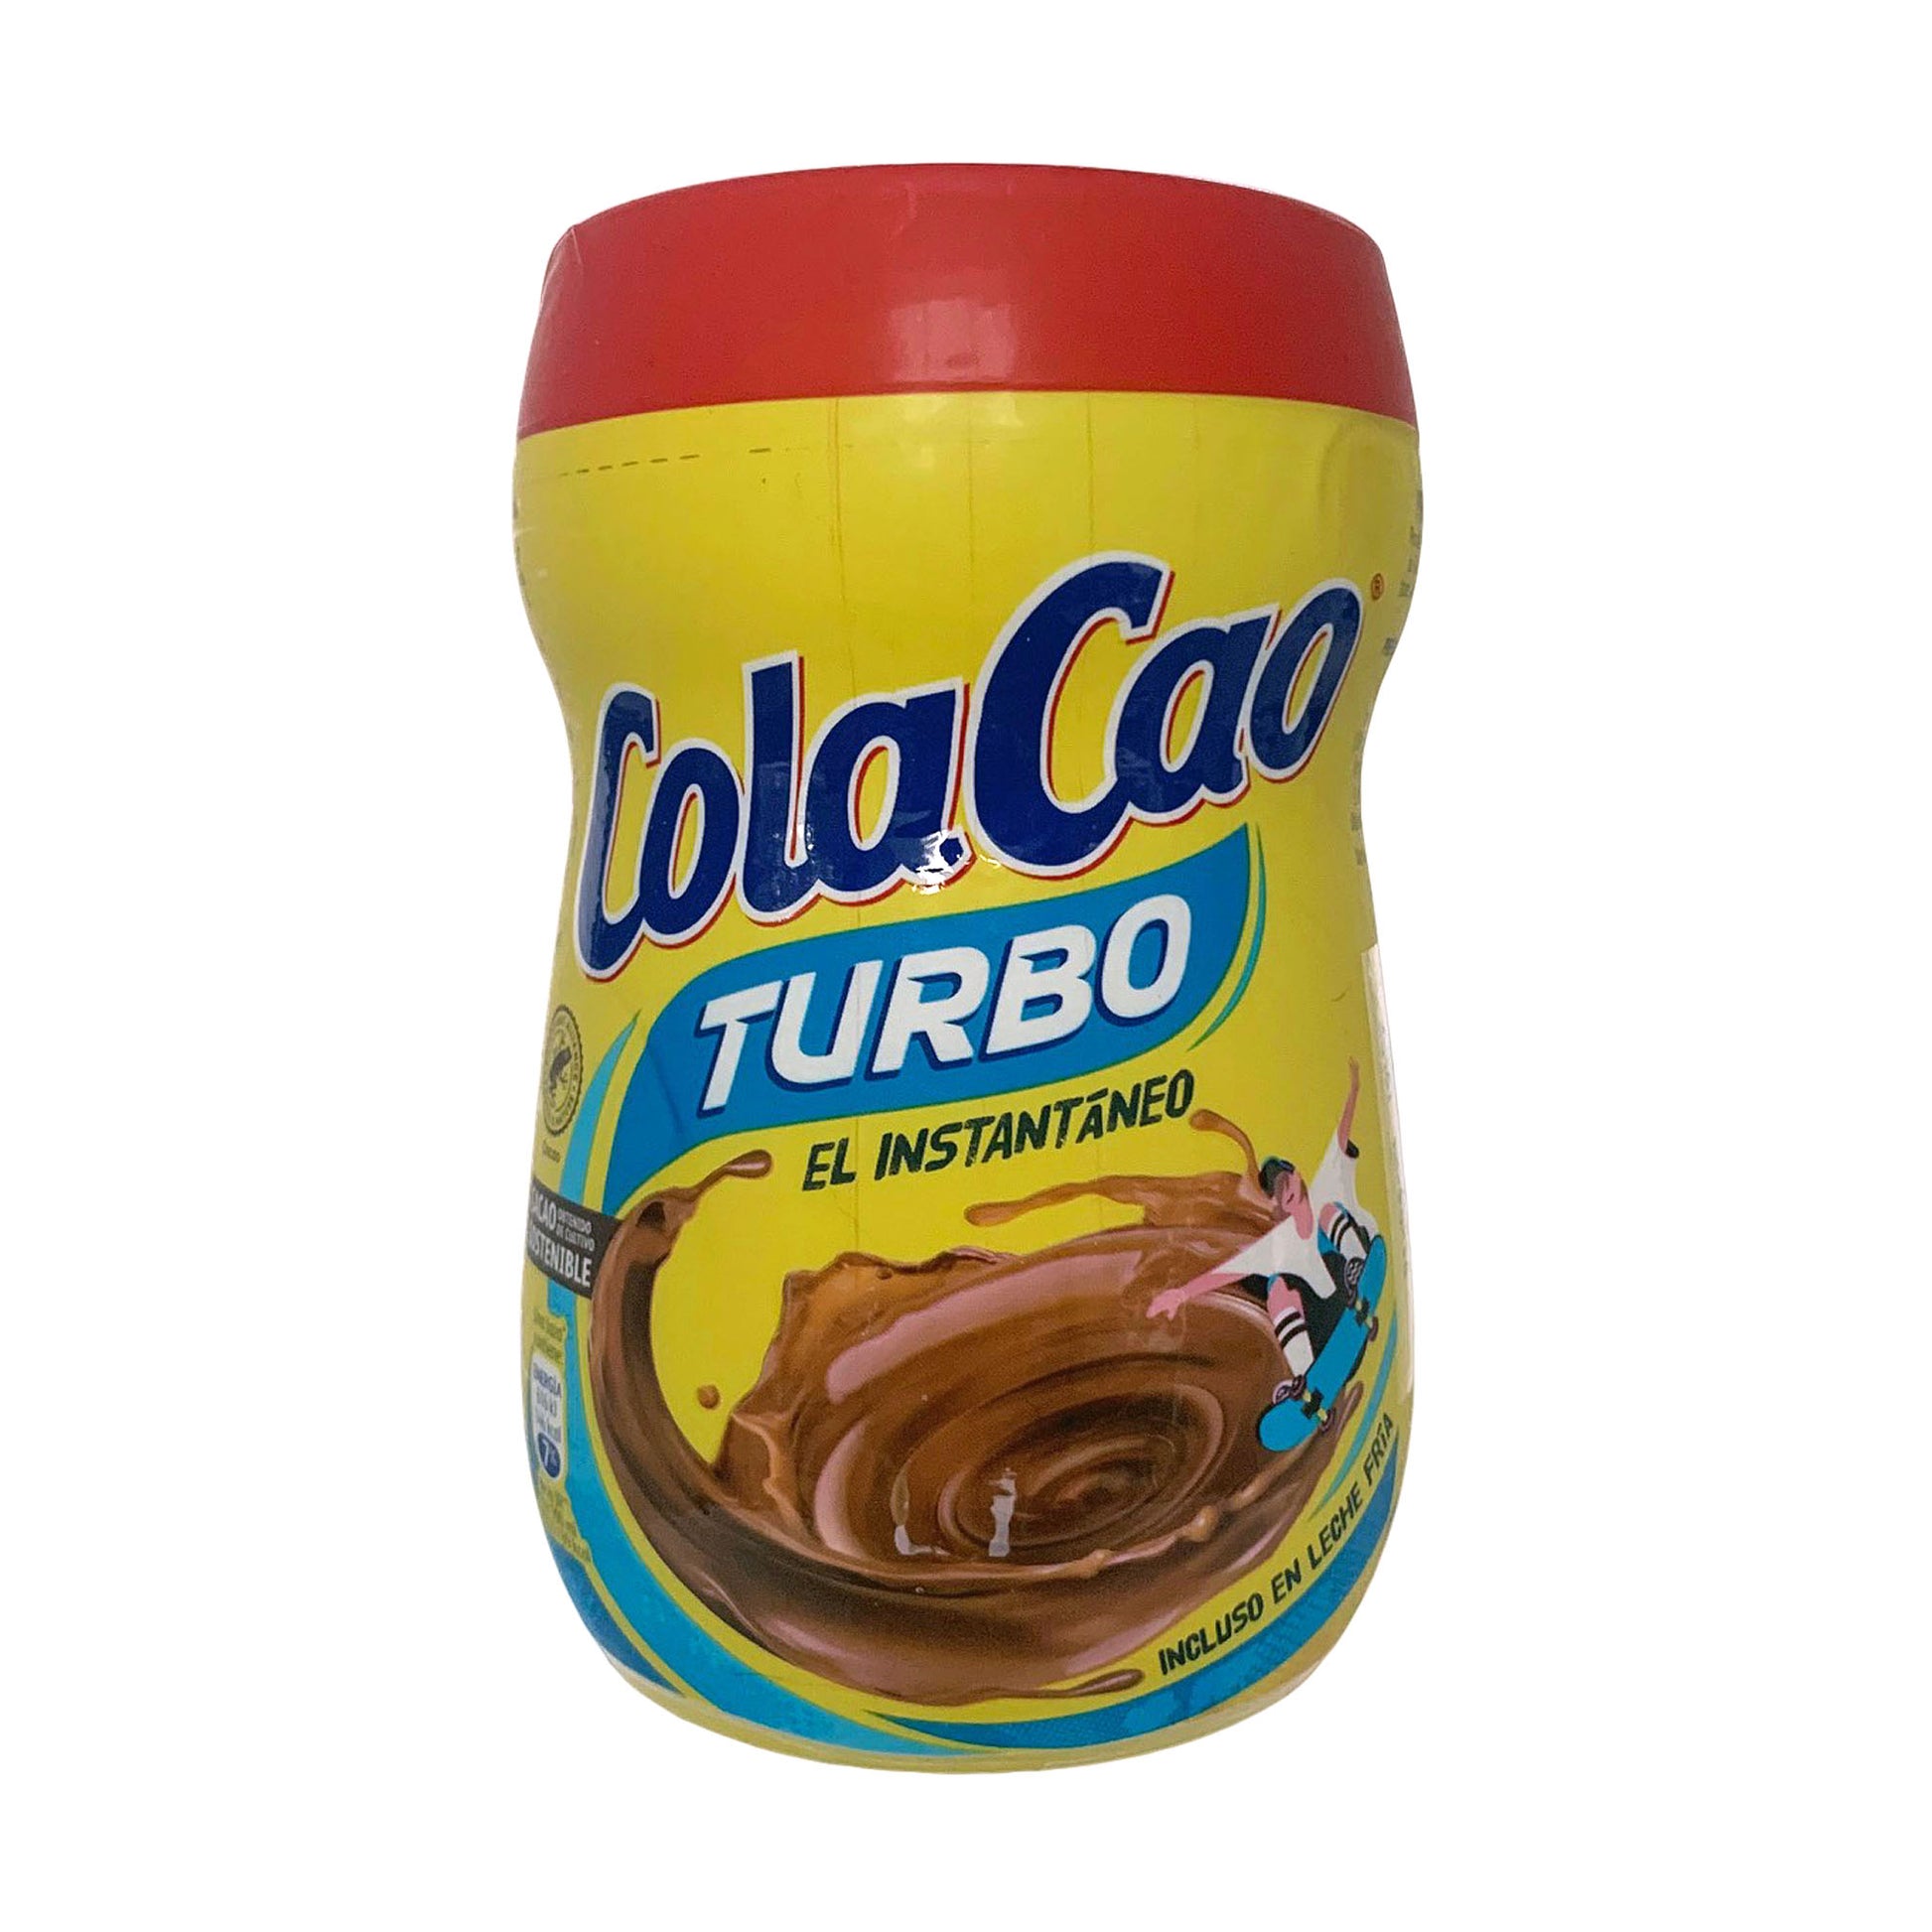 ColaCao Turbo Instant Hot or Cold Chocolate Drink Mix from Spain 375g – The  Curated Pantry